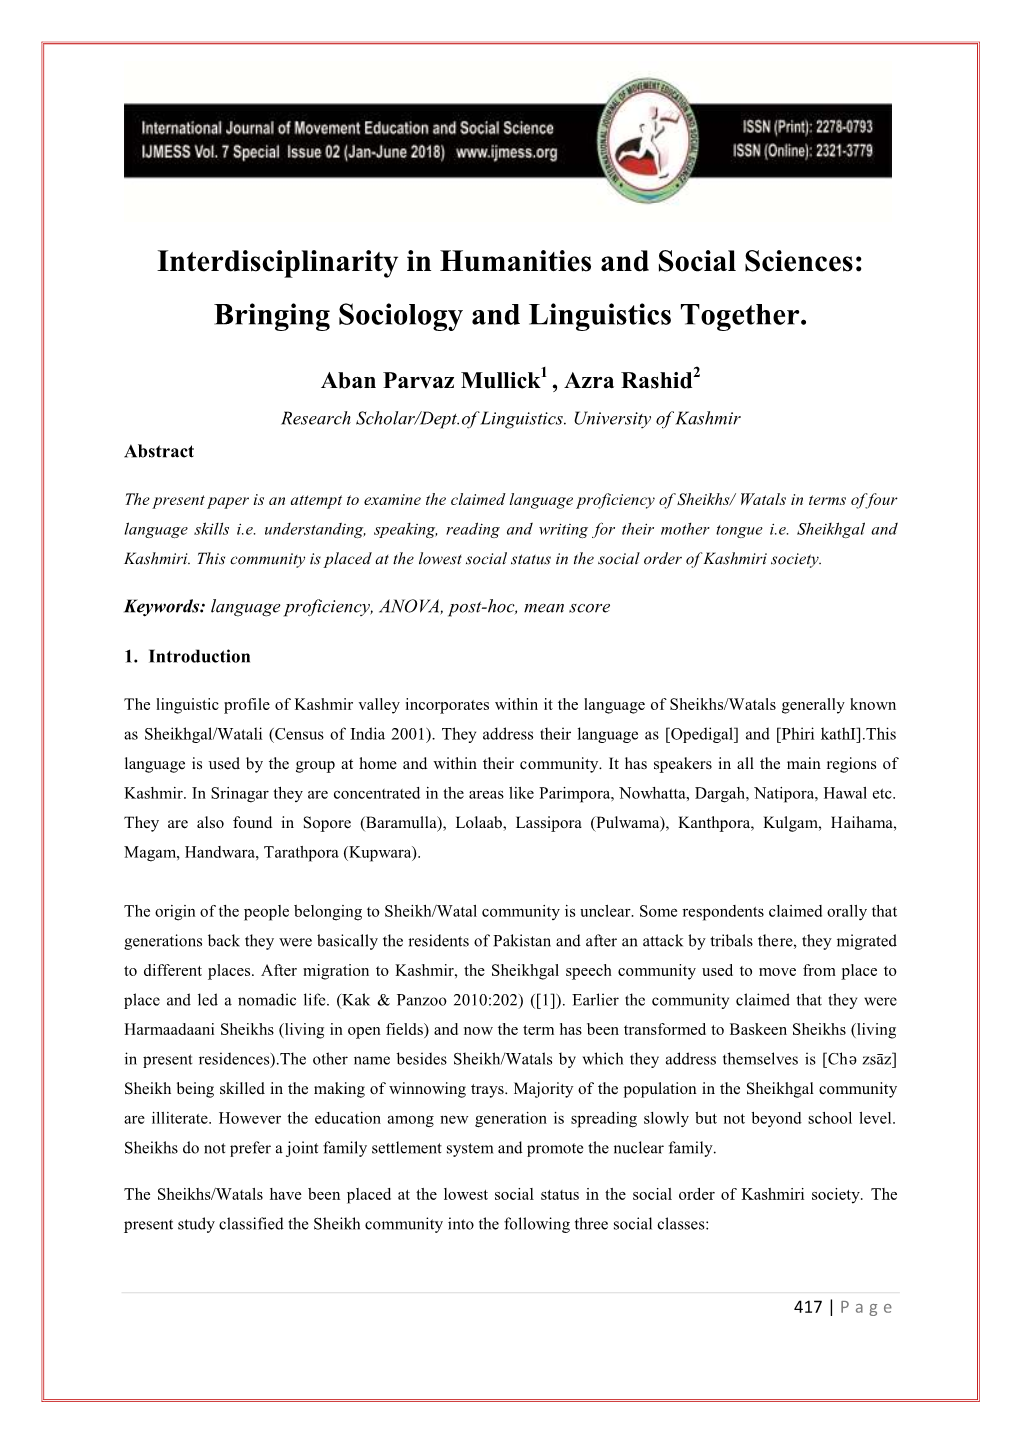 Interdisciplinarity in Humanities and Social Sciences: Bringing Sociology and Linguistics Together